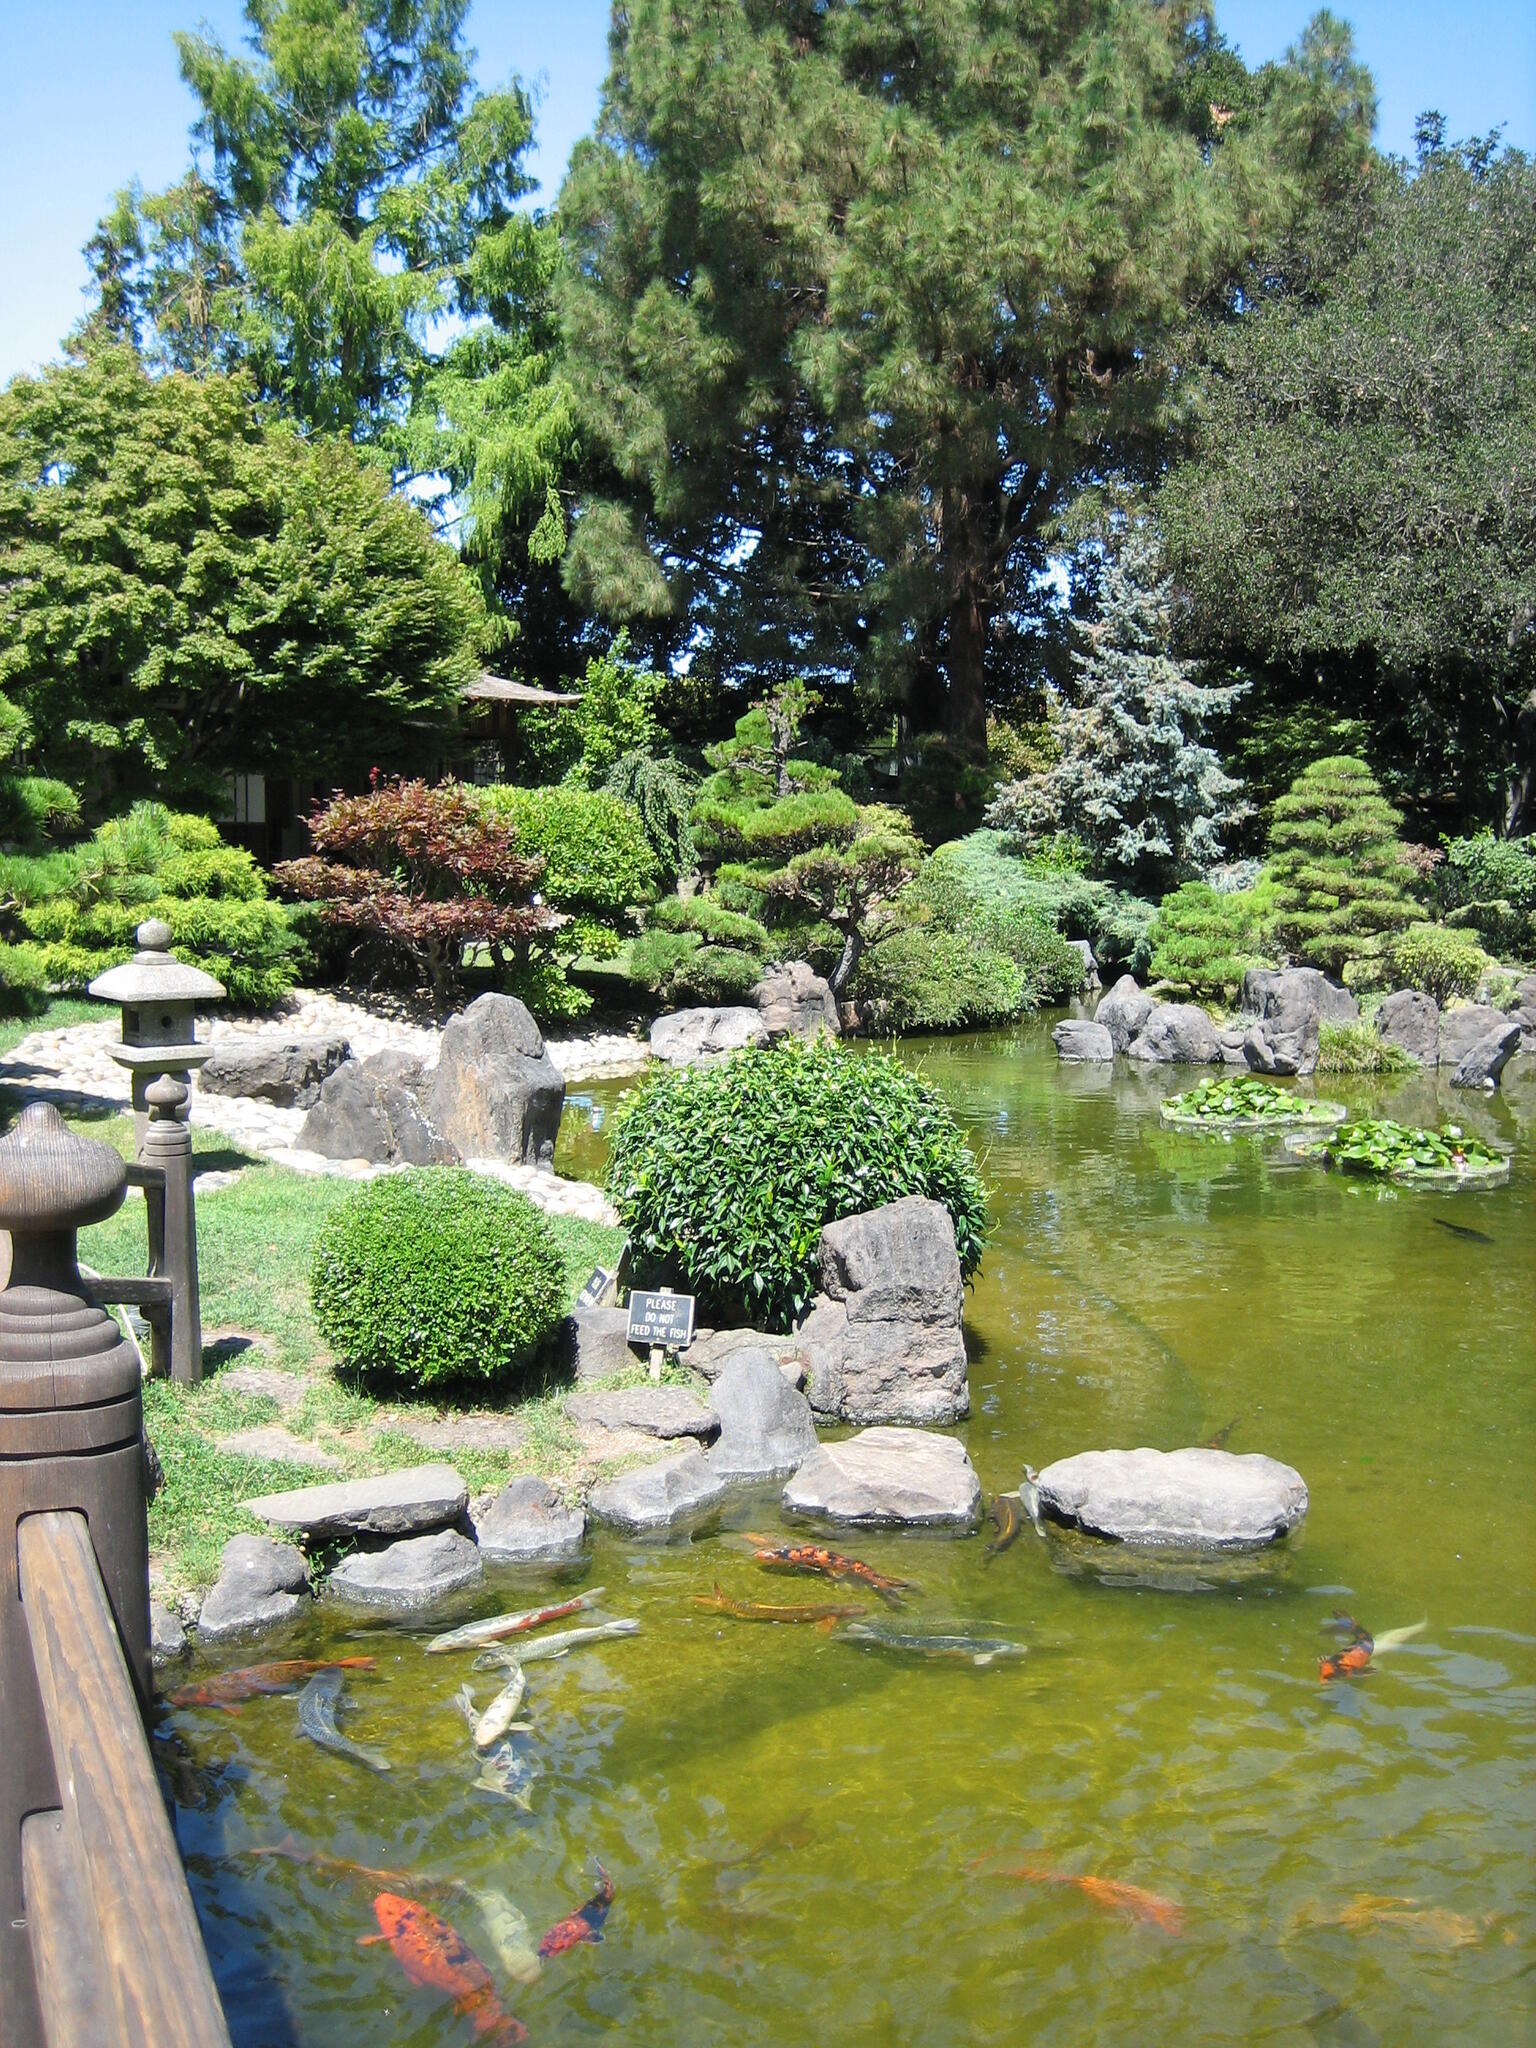 Temporary Closure Of Central Park S Japanese Garden For Repairs